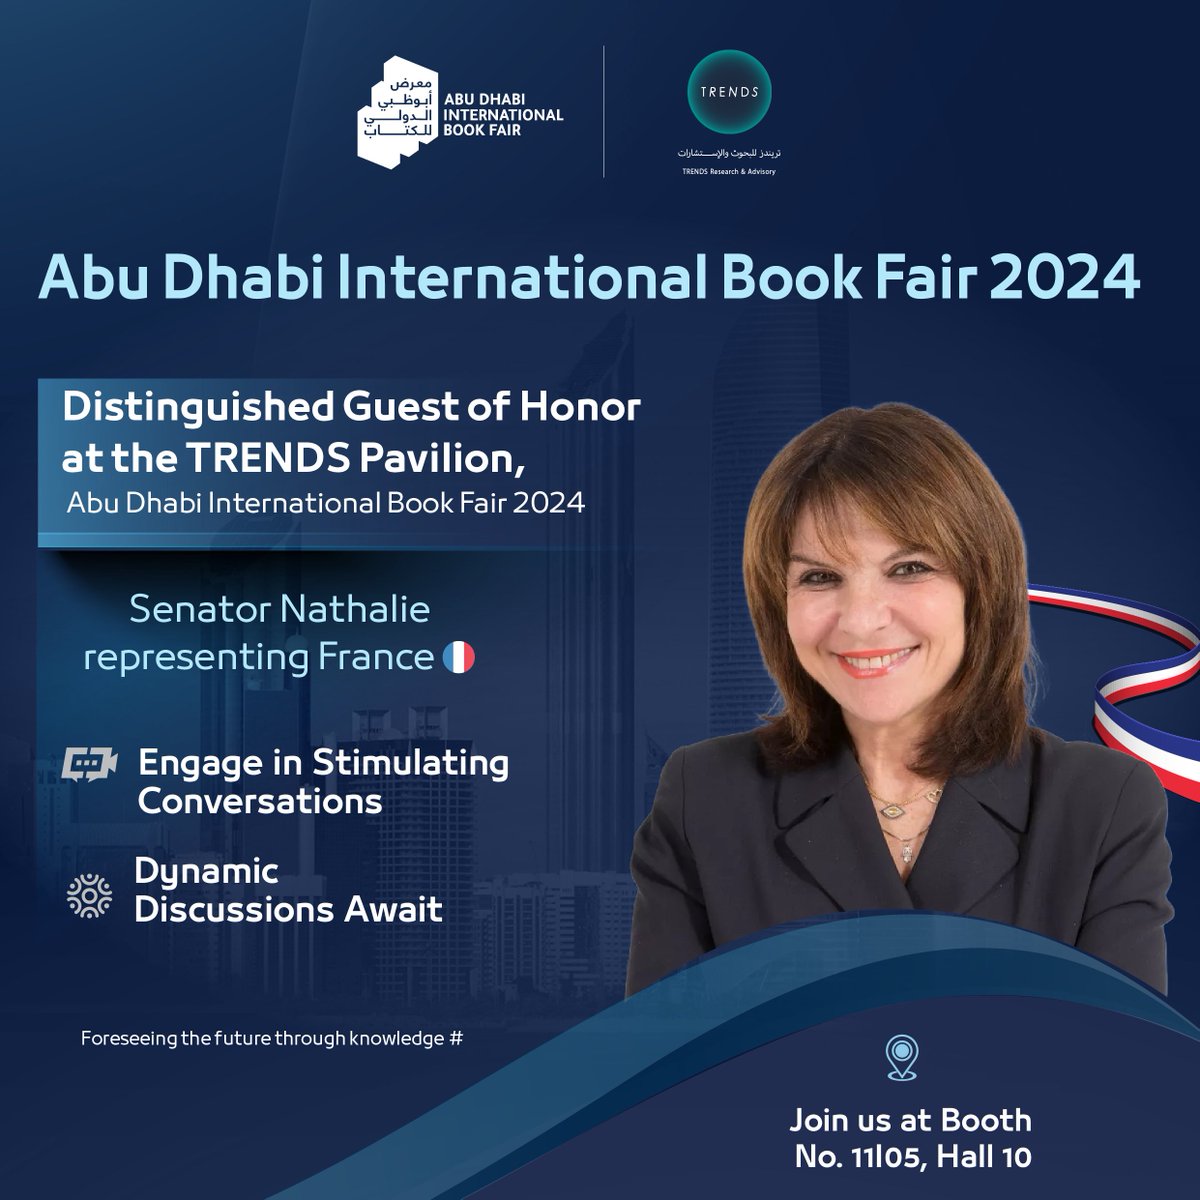 French Senator Nathalie Goulet has been designated as the distinguished guest of honor at the TRENDS pavilion during the Abu Dhabi International Book Fair 2024.

#AbuDhabiBookFair #CulturalExchange #GlobalLiterature #TRENDS

@senateur61
@adibf